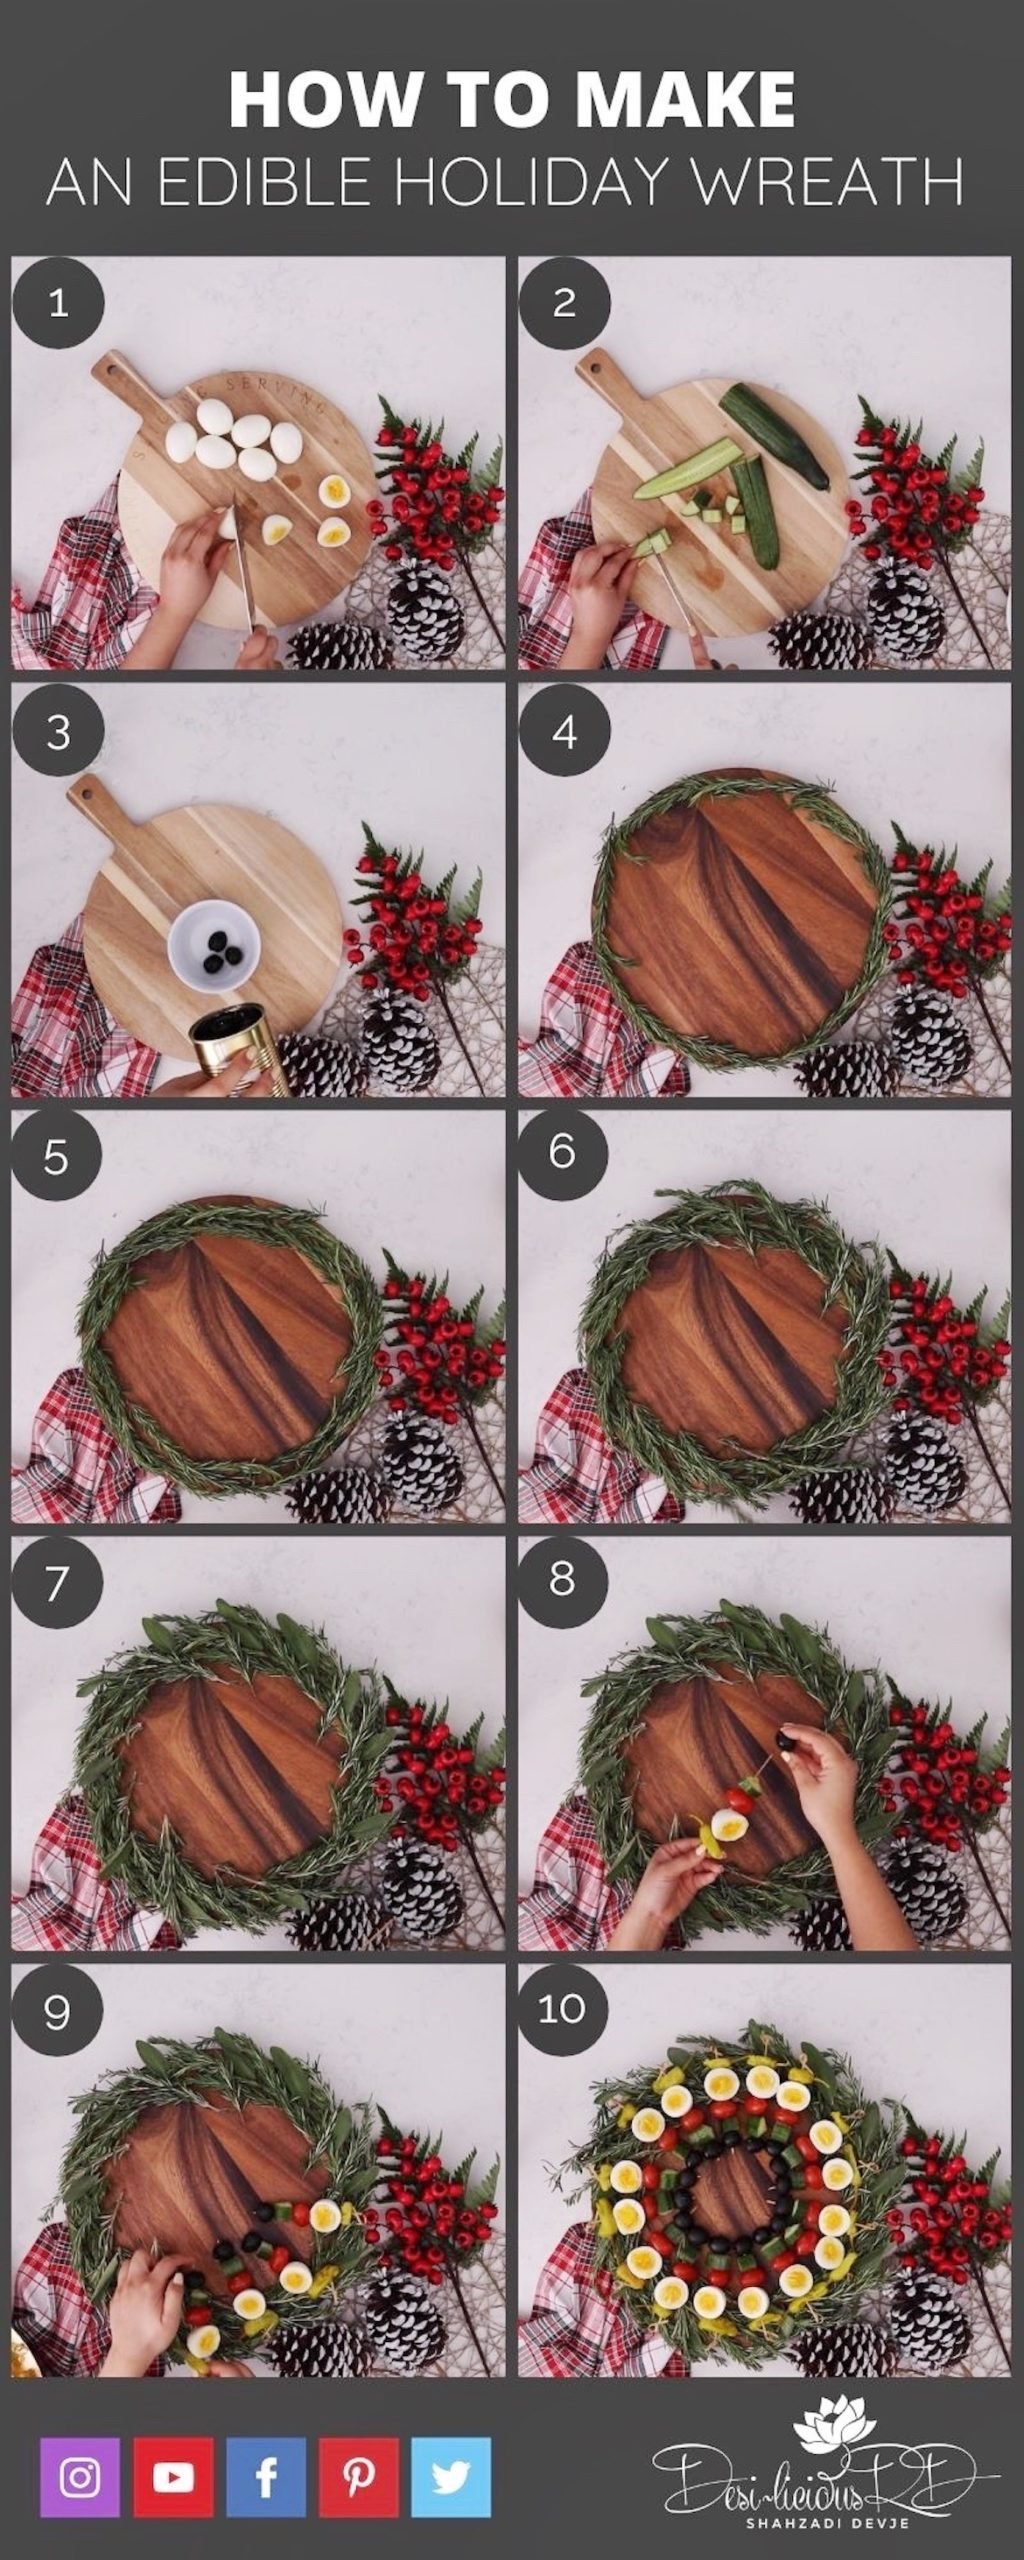 step by step preparation shots of how to make an edible holiday wreath - a low carb appetizer using boiled eggs for your holiday table.